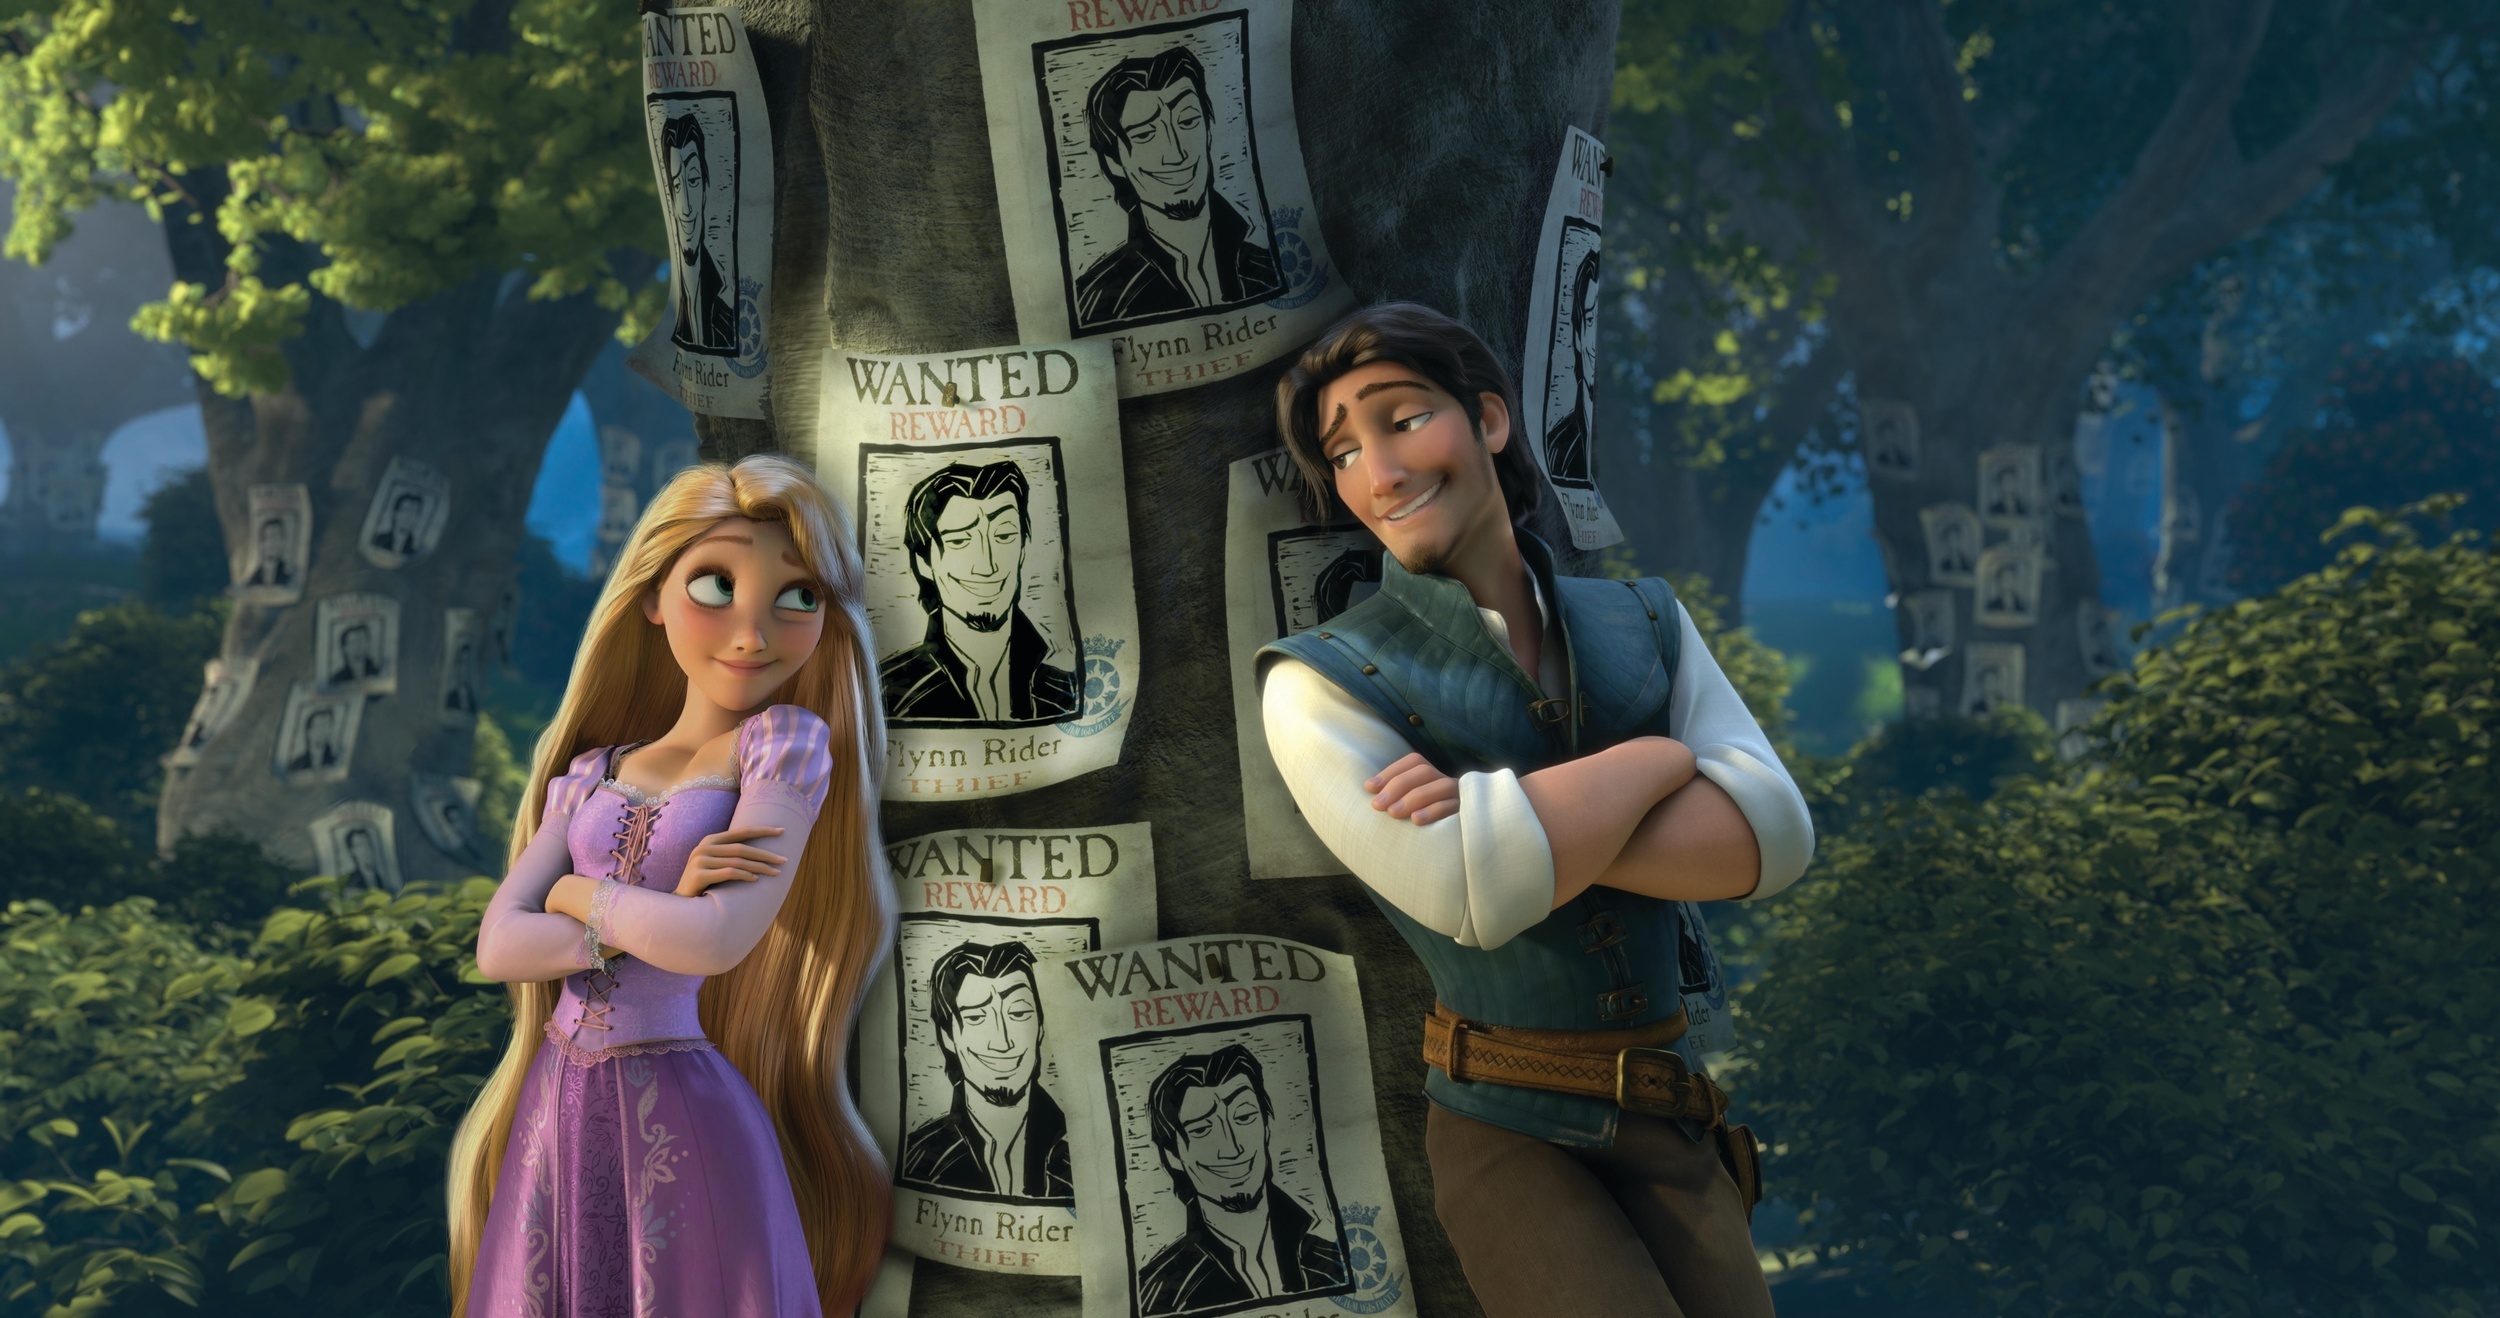 <p>Disney’s <em>Tangled</em> was a fraught production, leading to worries it would end up a disaster and a box-office fiasco. It ended up being a big hit that spawned multiple TV shows. The film begins not with Rapunzel but with Flynn Rider giving a voiceover that starts with, “This is the story of how I died.” He follows that with, “Don’t worry, this is actually a very fun story,” but that still grabs you.</p><p>You may also like: <a href='https://www.yardbarker.com/entertainment/articles/the_25_best_conspiracy_thrillers_110923/s1__38207746'>The 25 best conspiracy thrillers</a></p>